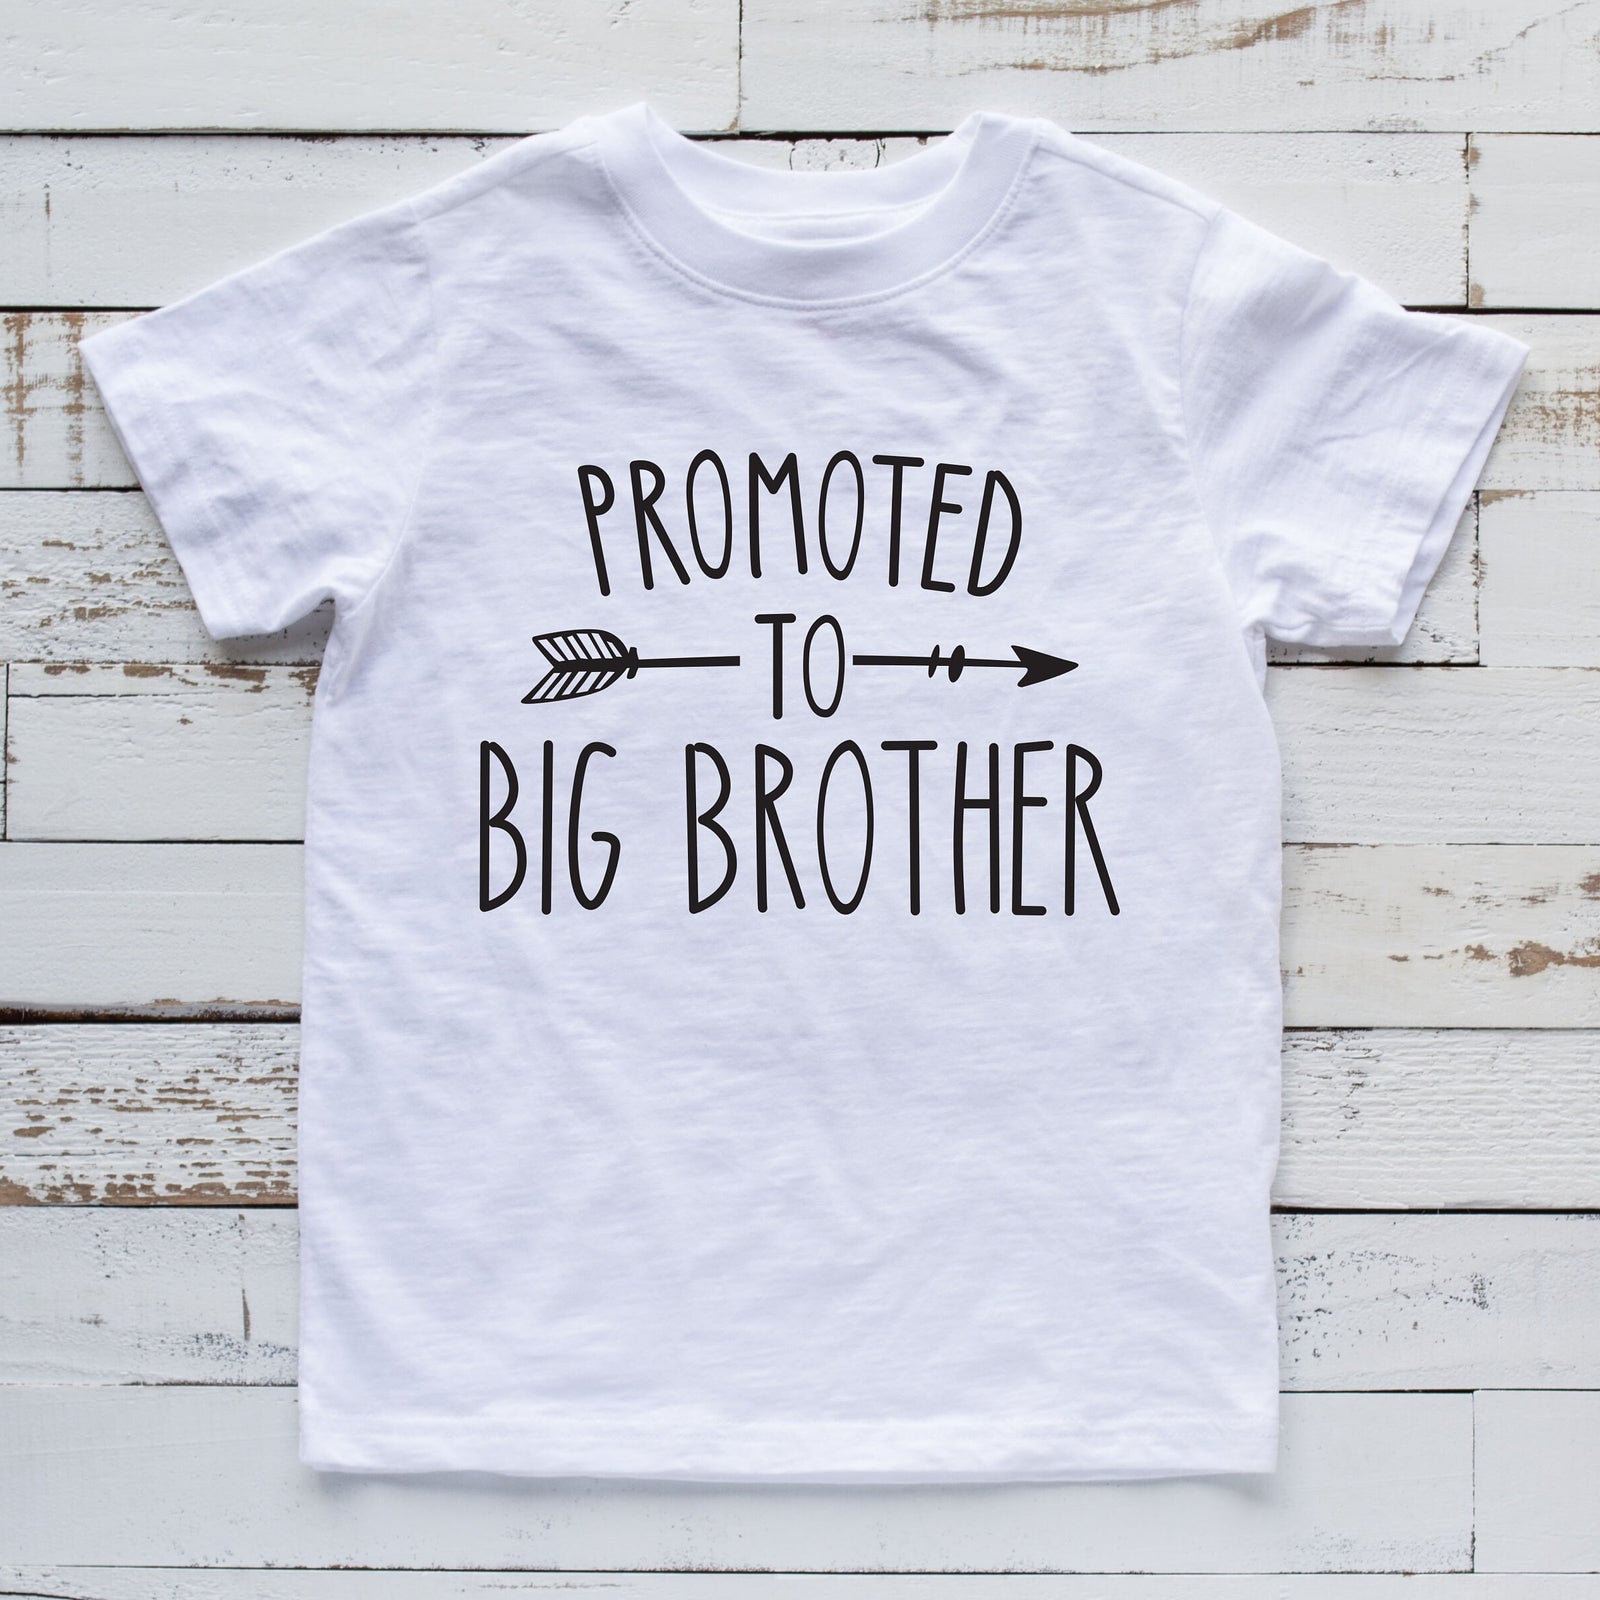 Promoted to Big Brother T Shirt - Cute Big Brother T Shirt - Baby Announcement Shirt - Family Announcement Baby Reveal Shirt